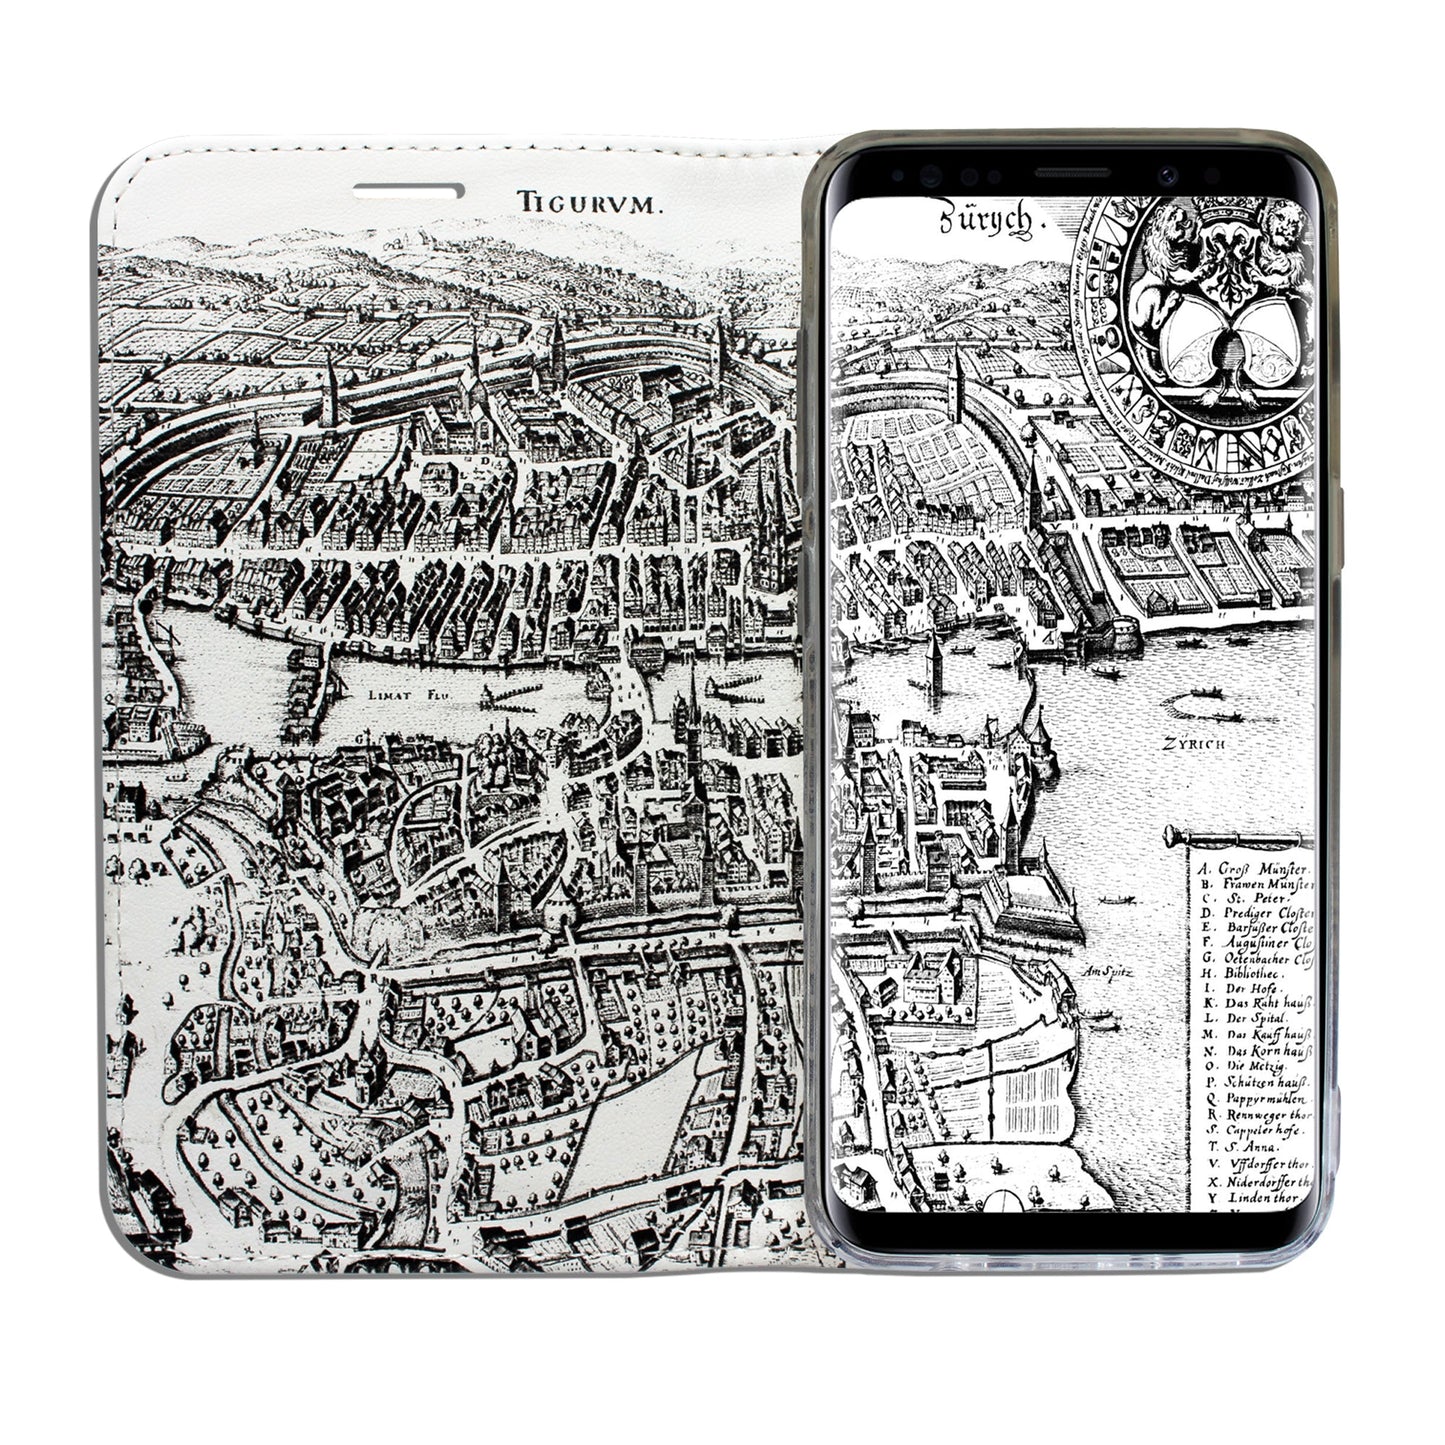 Coque Zurich City from Above Panorama pour Samsung Galaxy S8 Plus